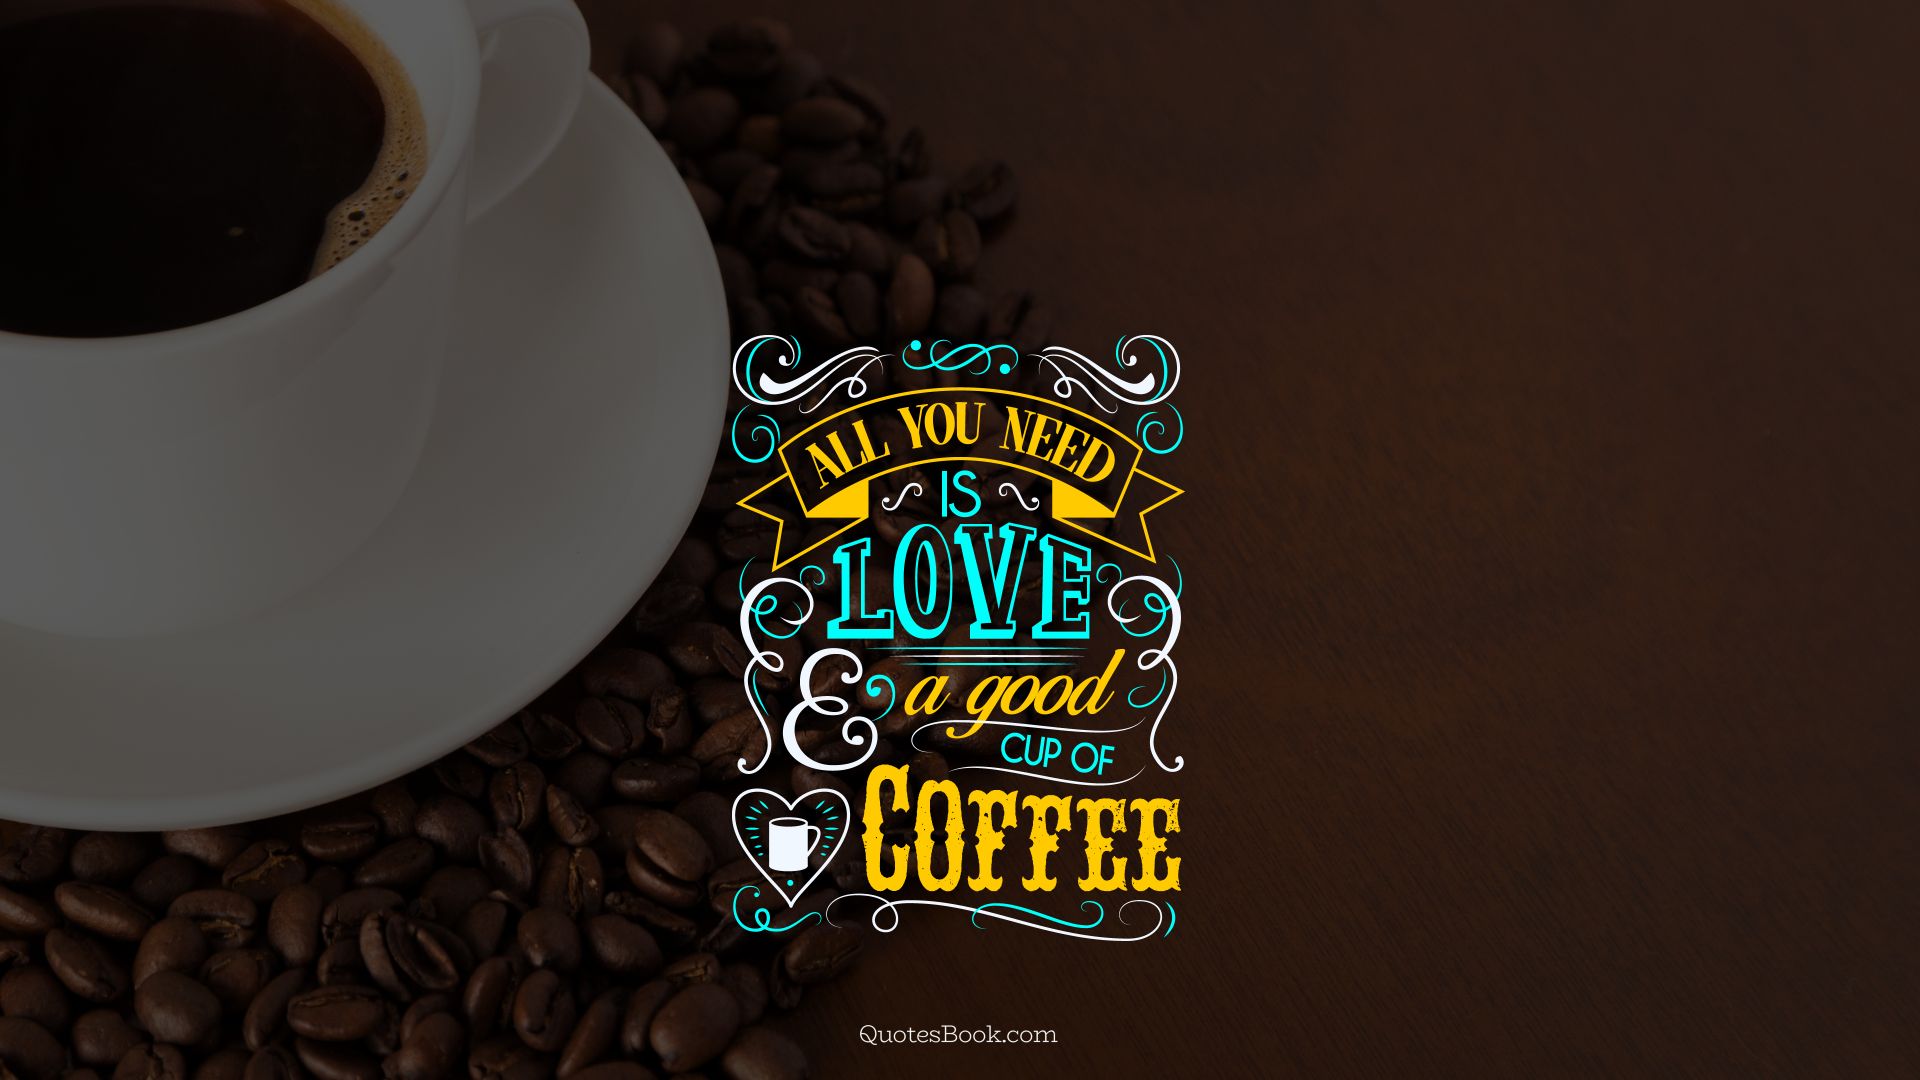 All you need is love and a good coffee